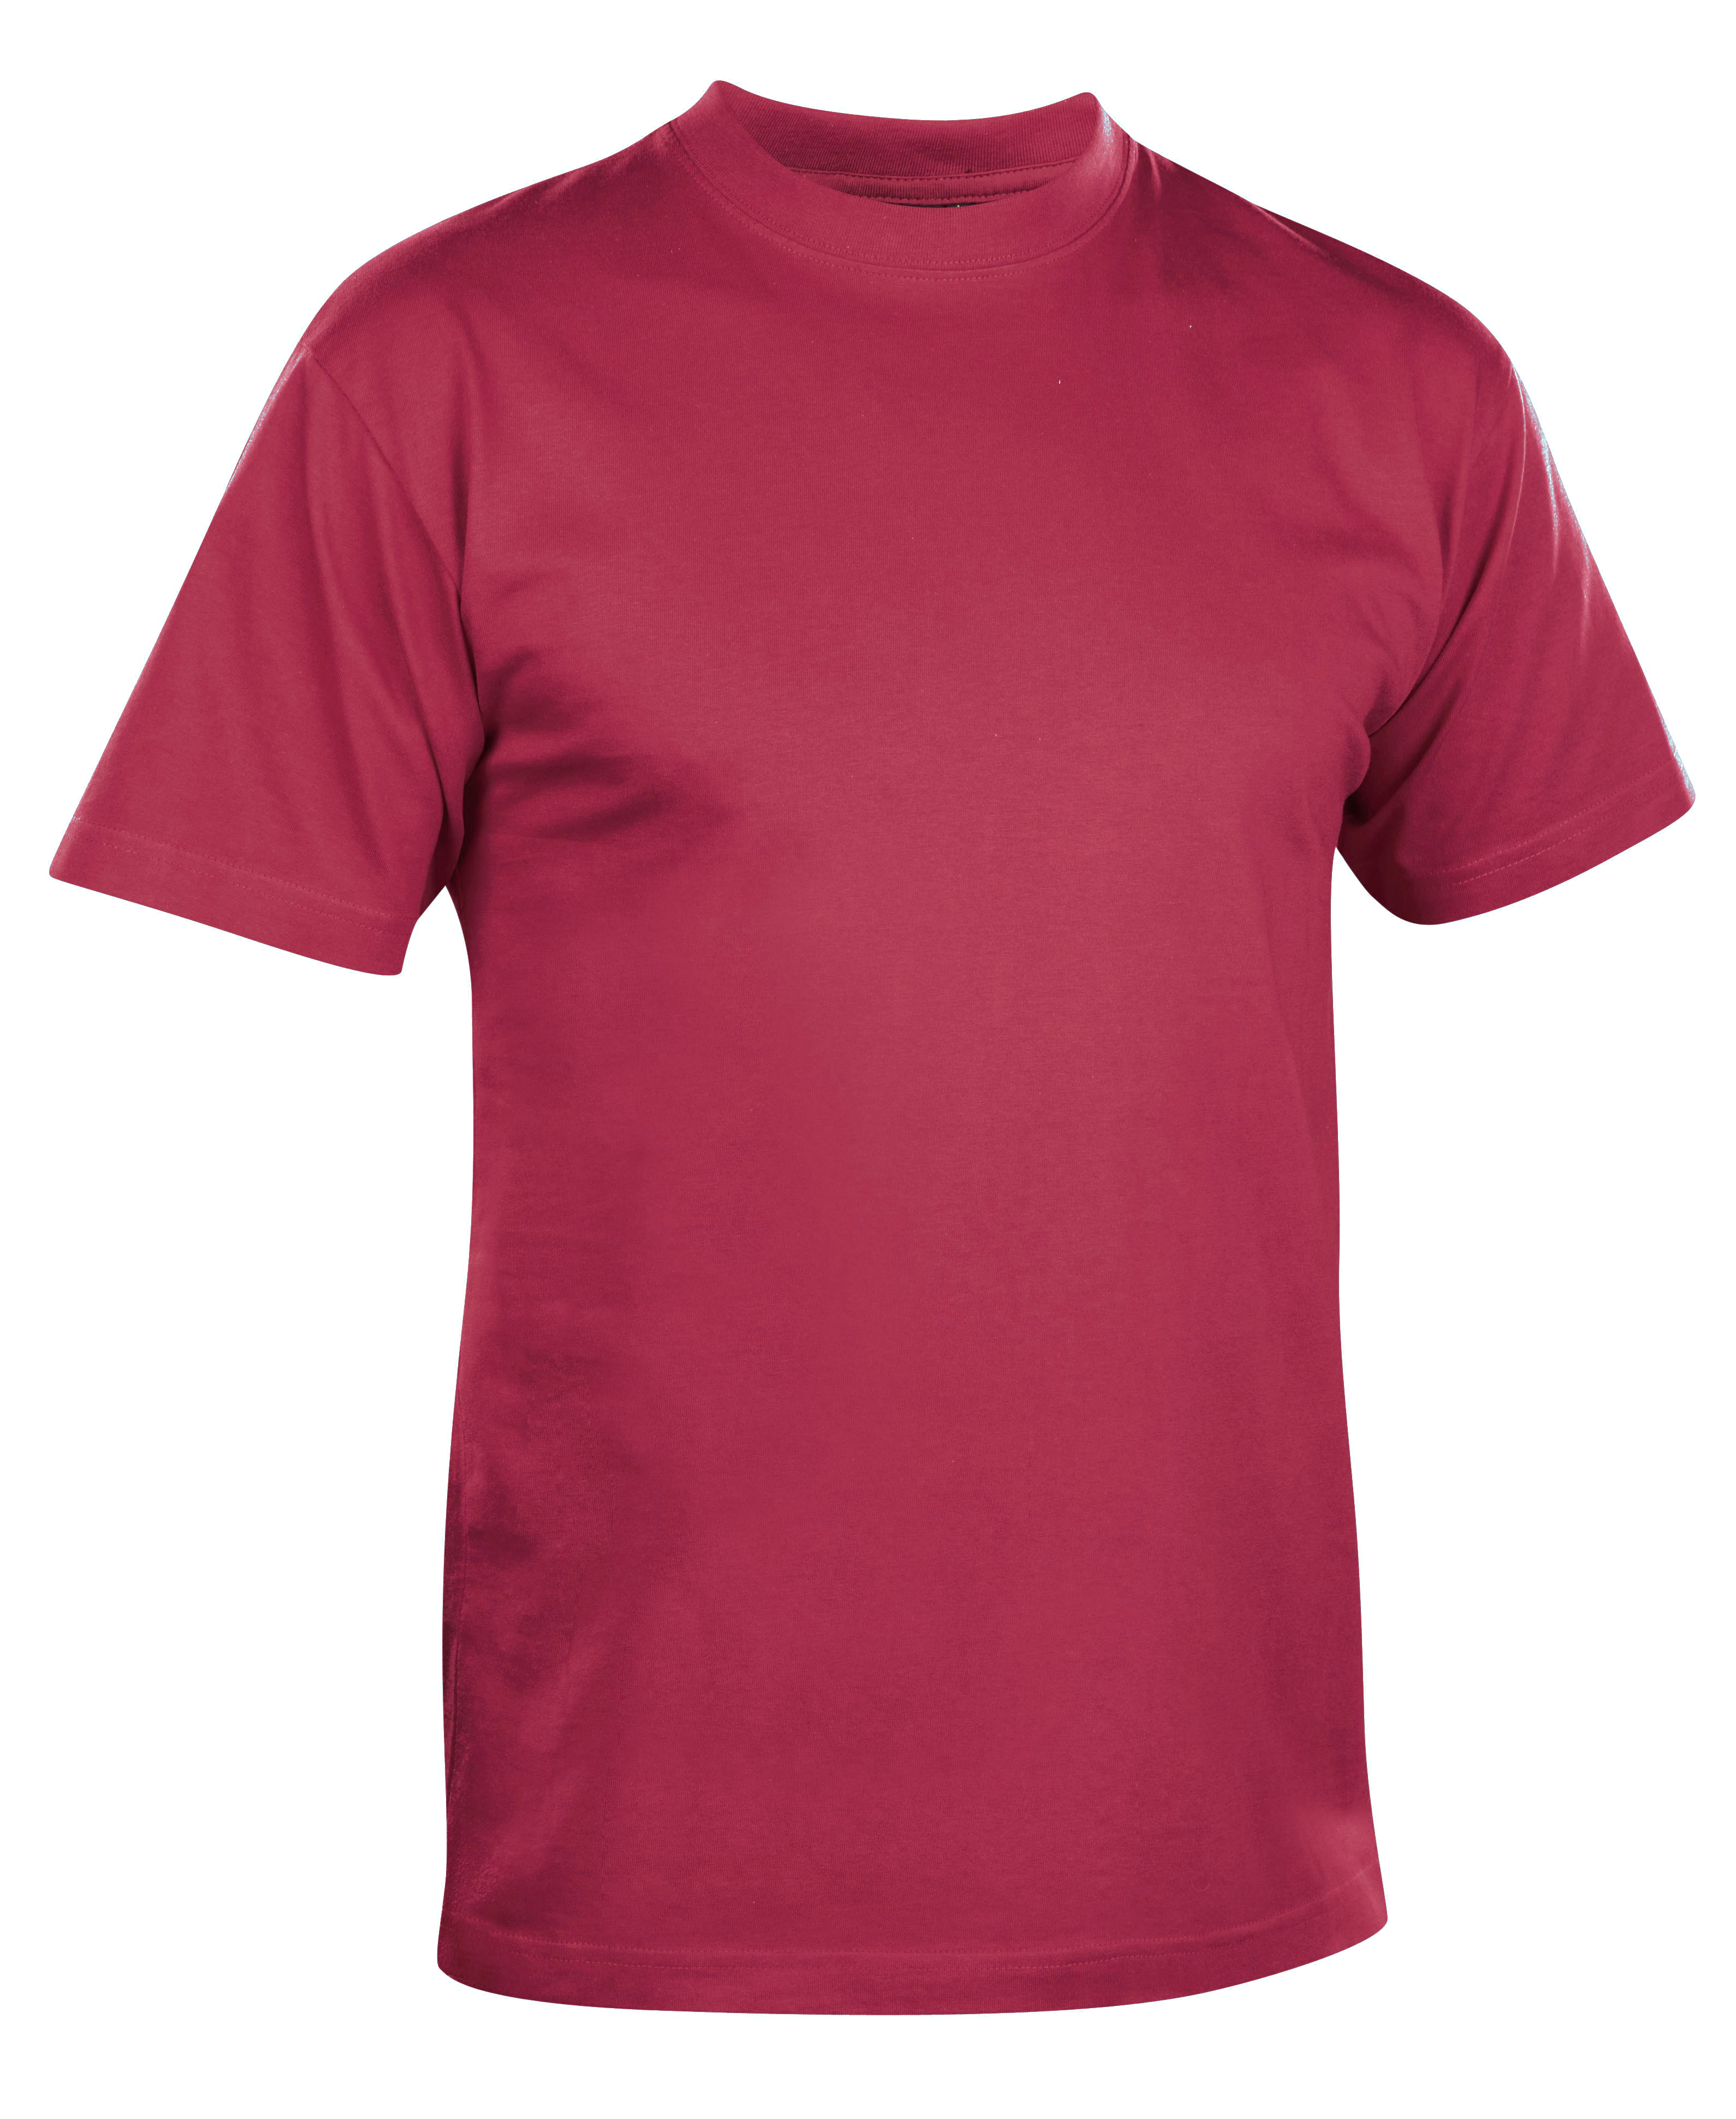 Red T-Shirt PNG Image